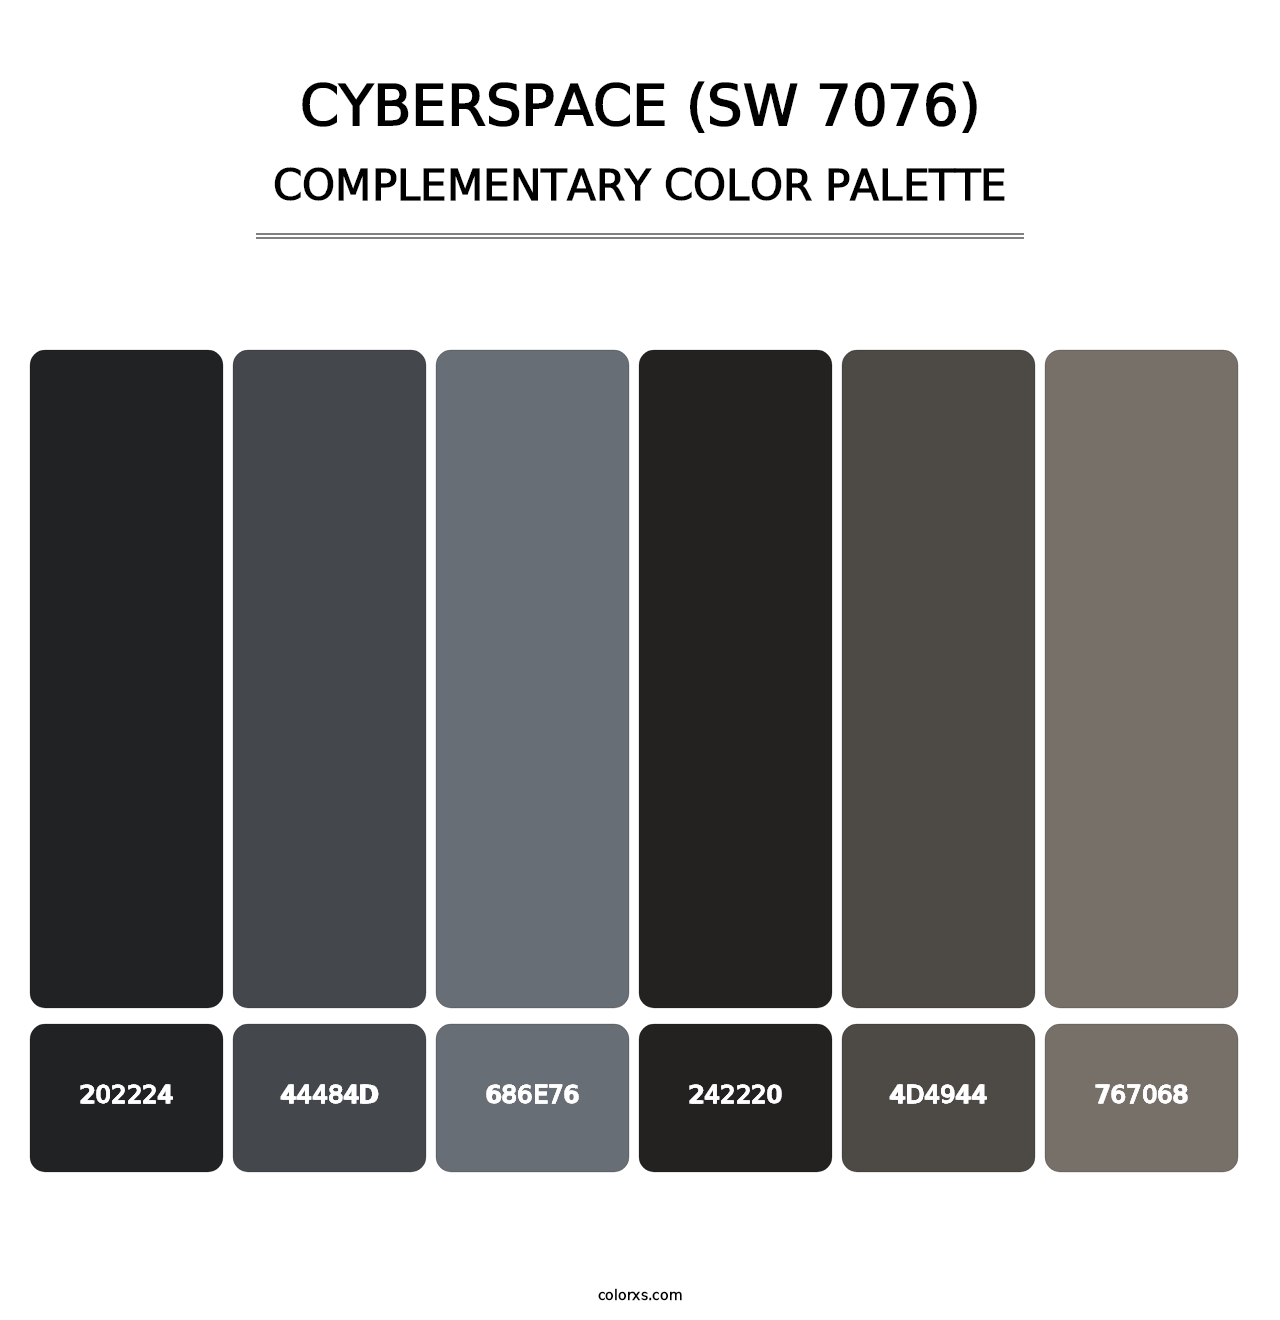 Cyberspace (SW 7076) - Complementary Color Palette